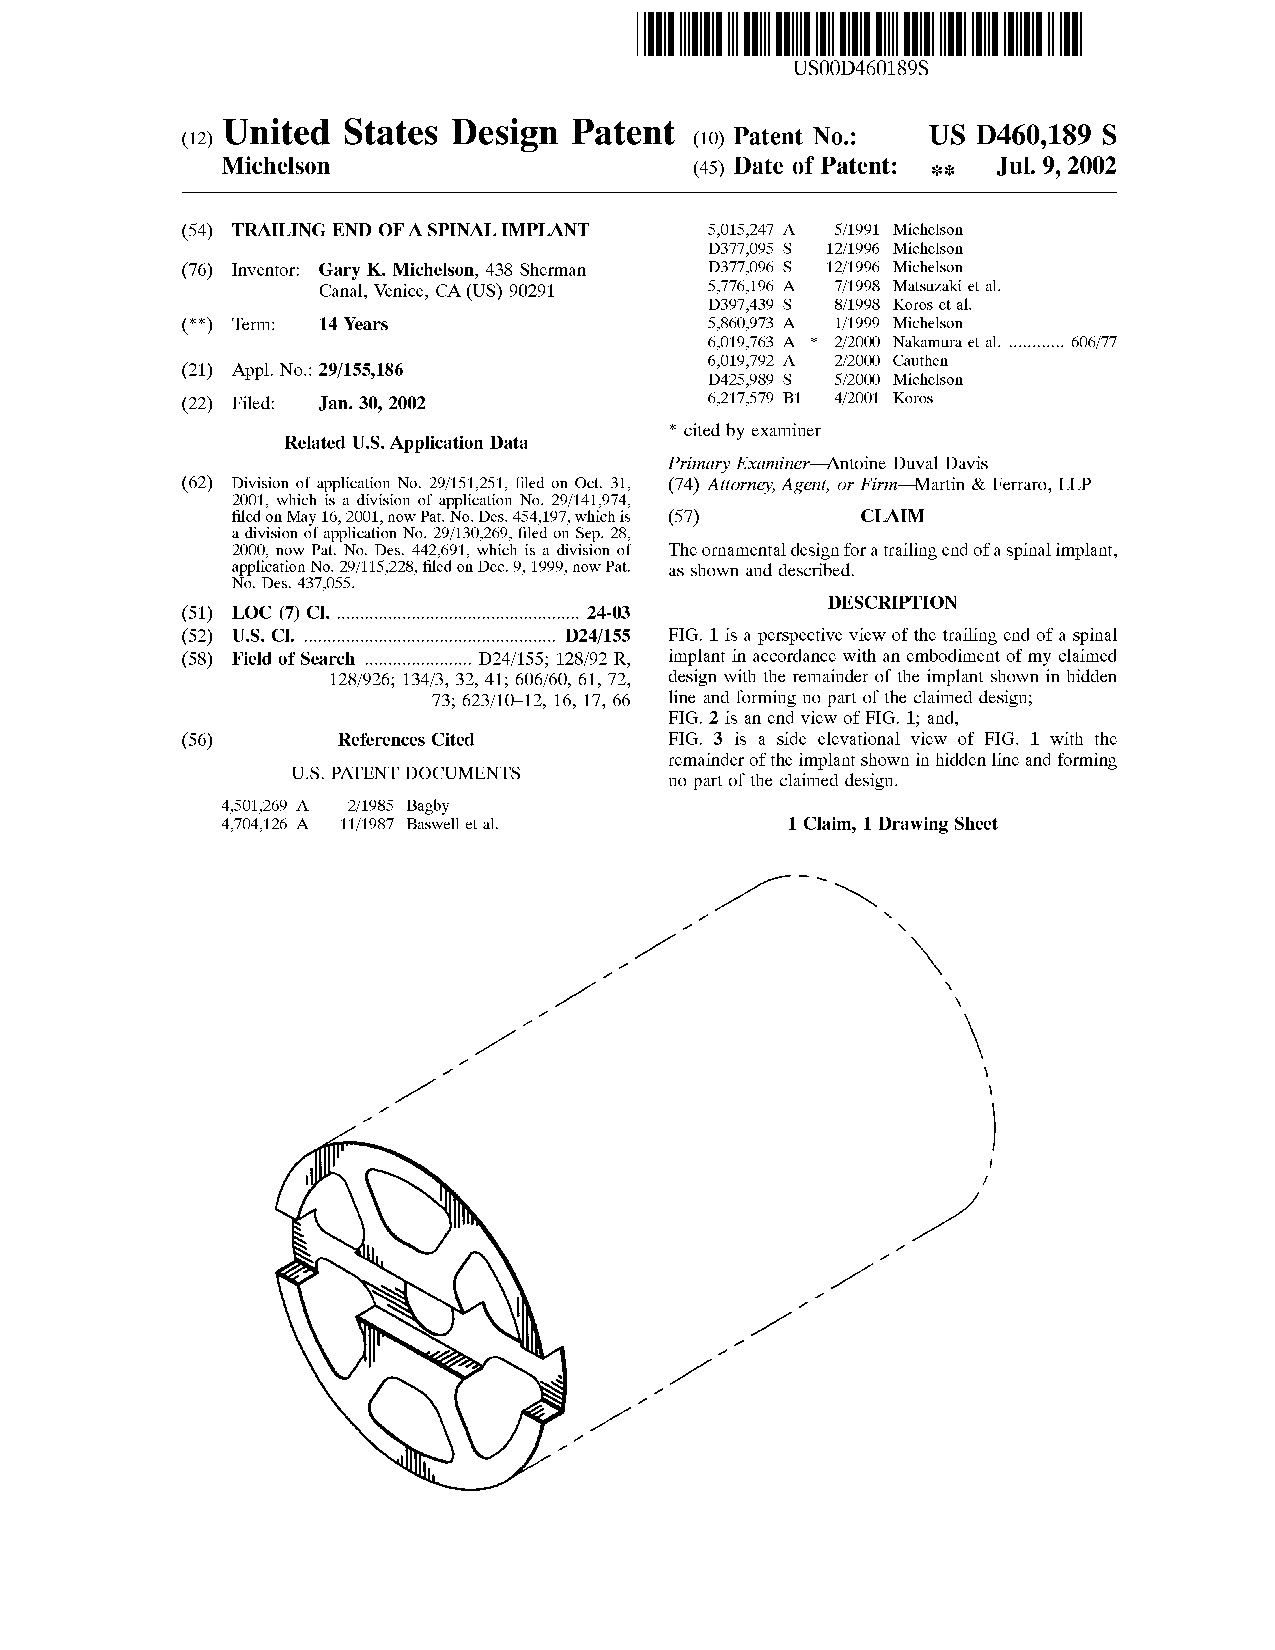 Trailing end of a spinal implant - Patent D460,189